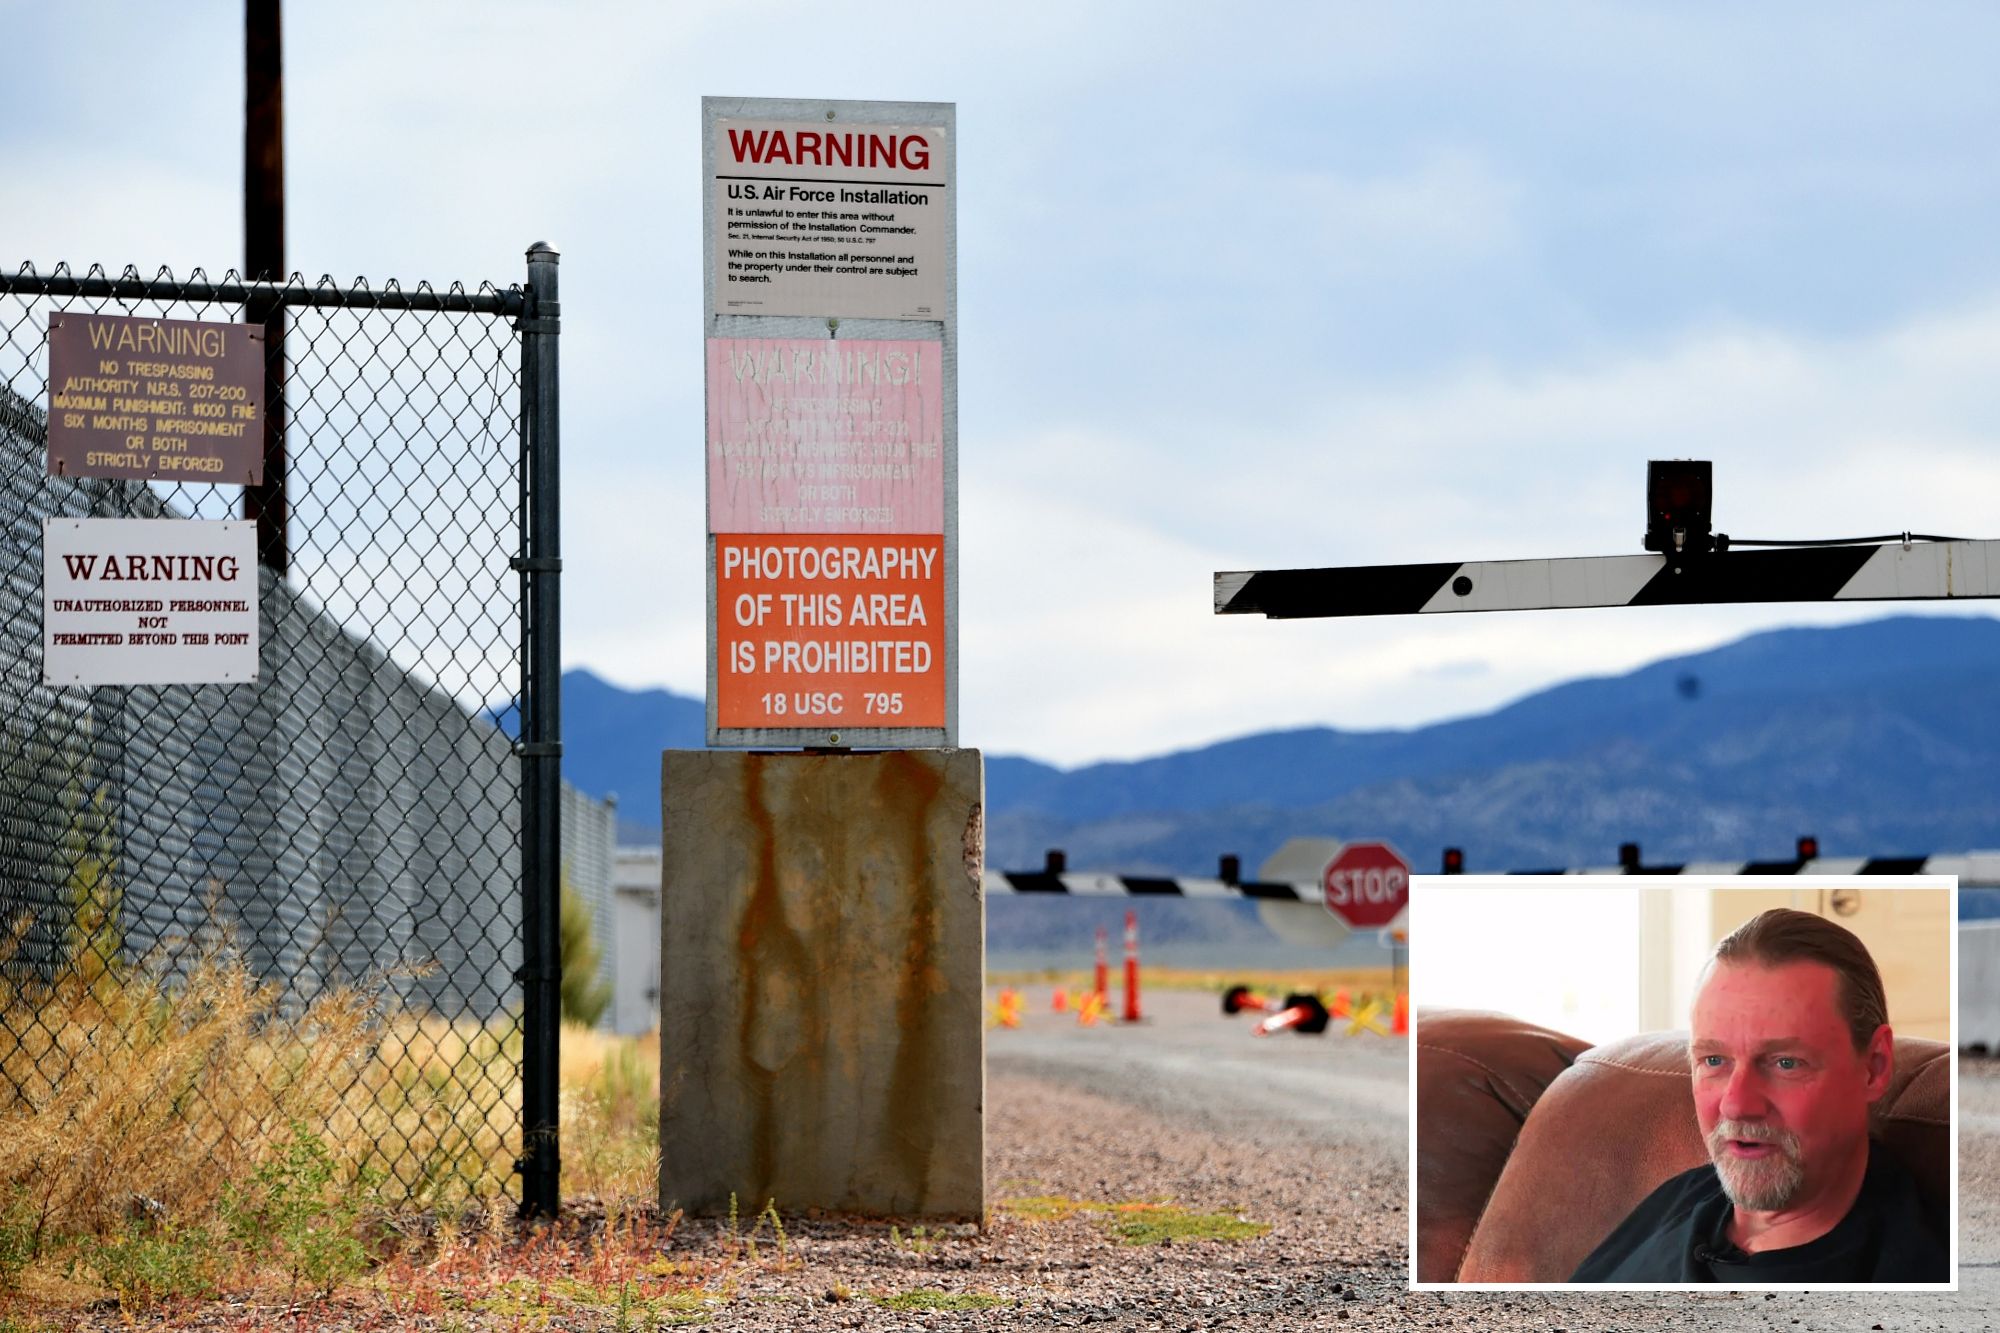 Area 51 investigator says FBI ransacked home & seized computers in mystery raid